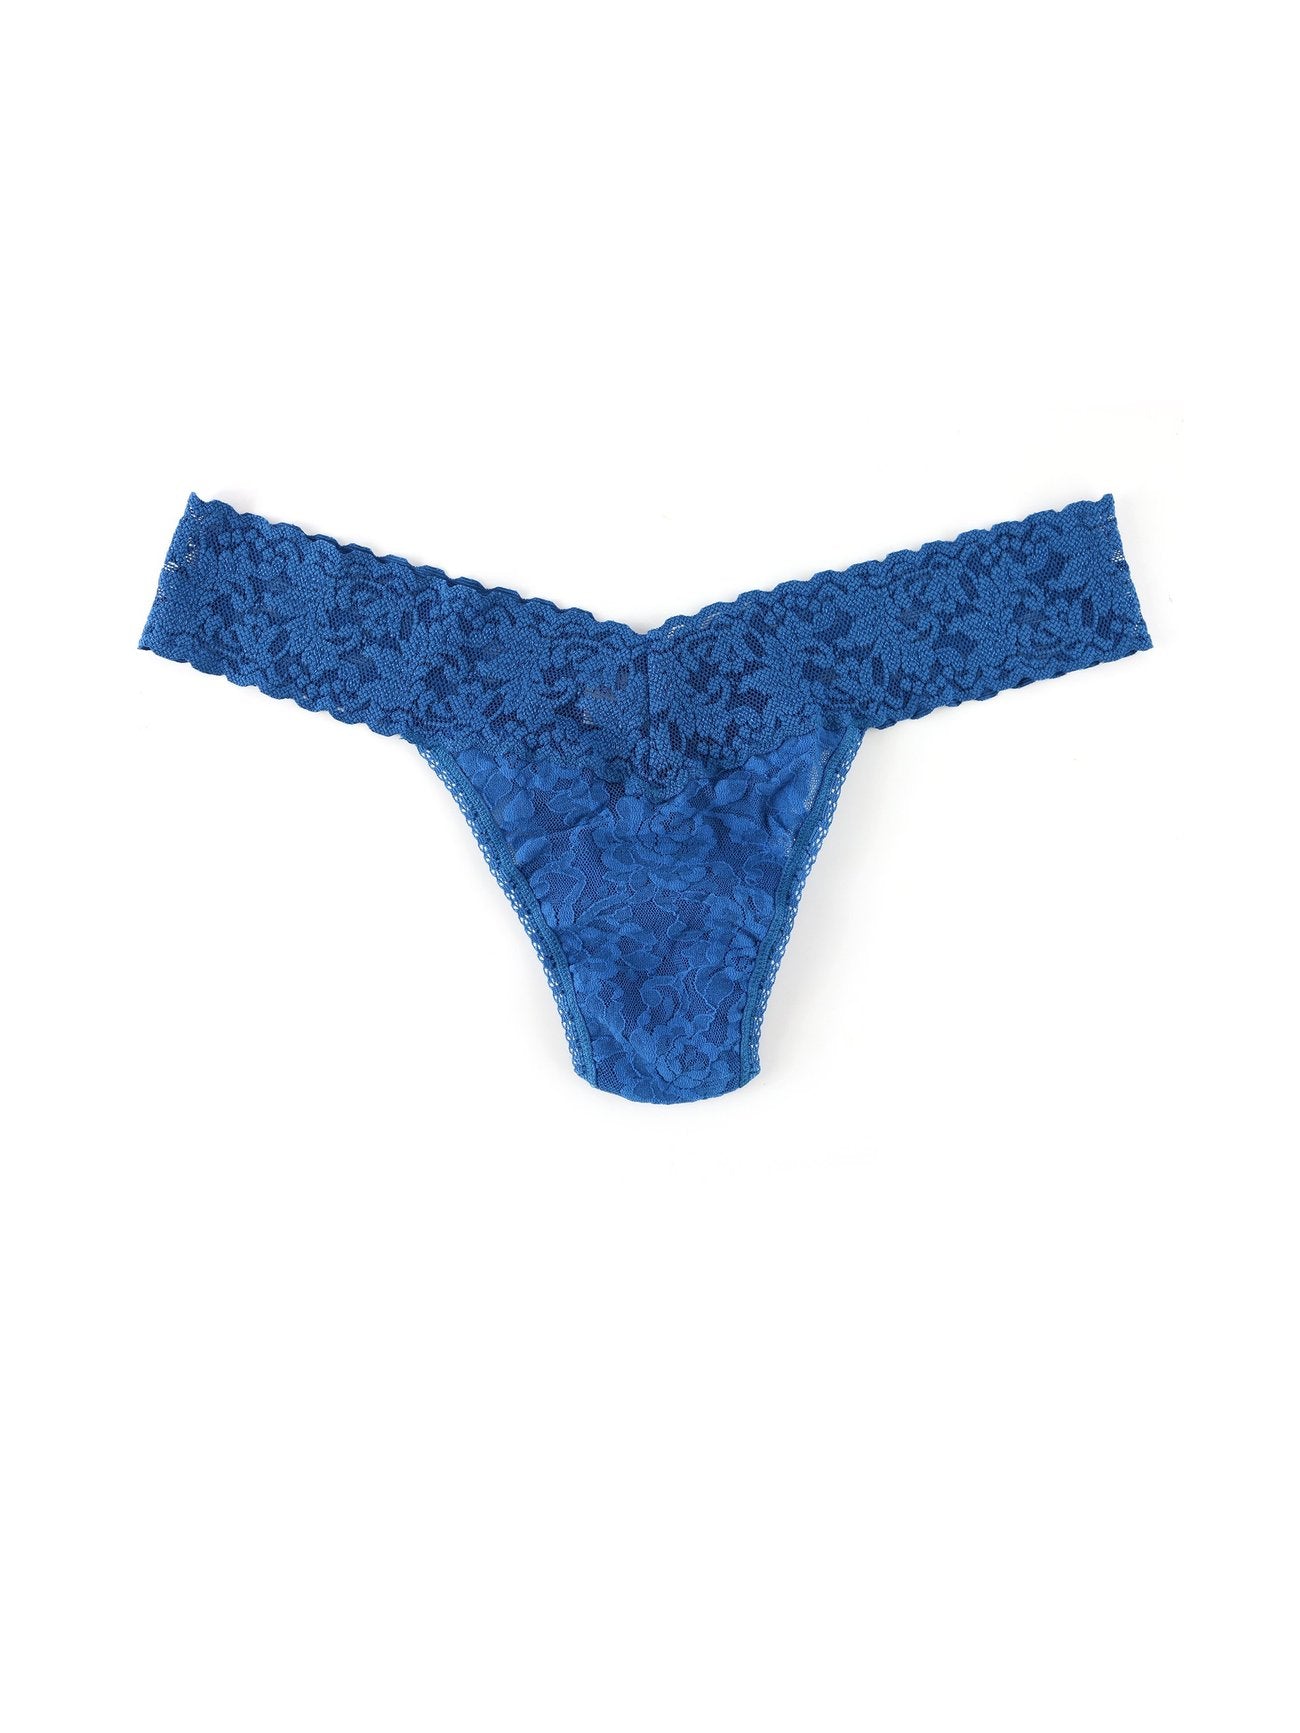 Buy beguiling-blue Hanky Panky Signature Lace Low Rise Thong - Packaged 4911p